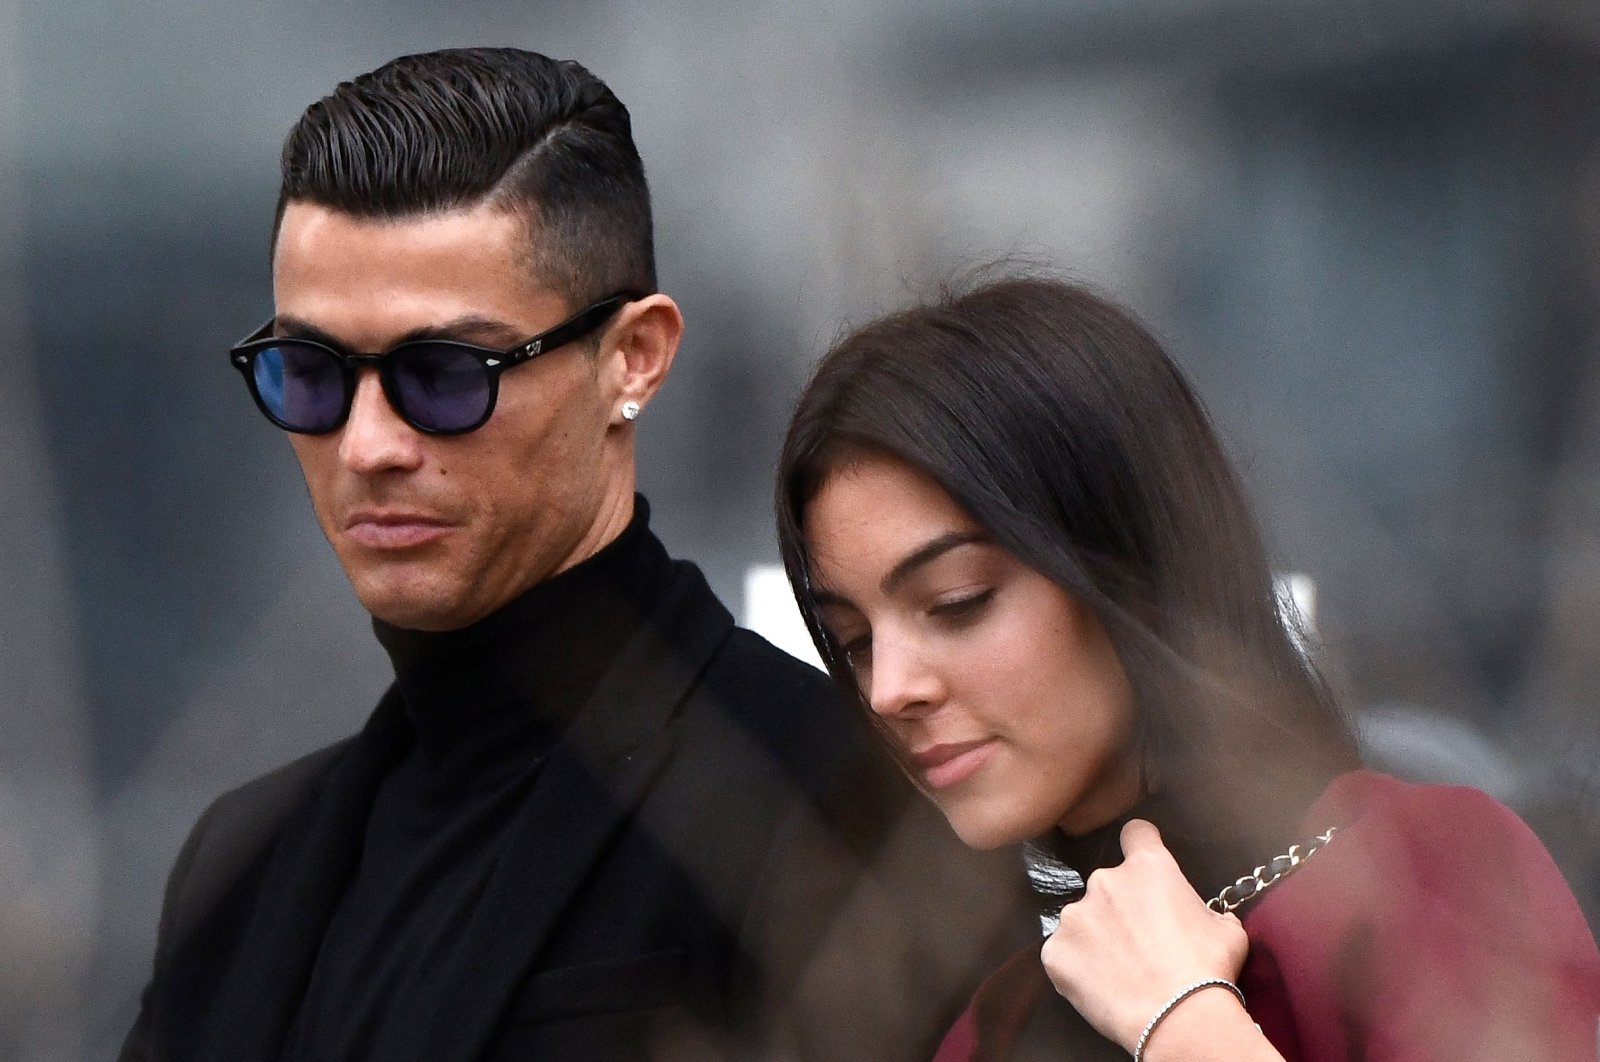 Cristiano Ronaldo (L) and Georgina Rodriguez are seen after a court hearing for tax evasion, Madrid, Spain, Jan. 22, 2019. (AFP Photo)